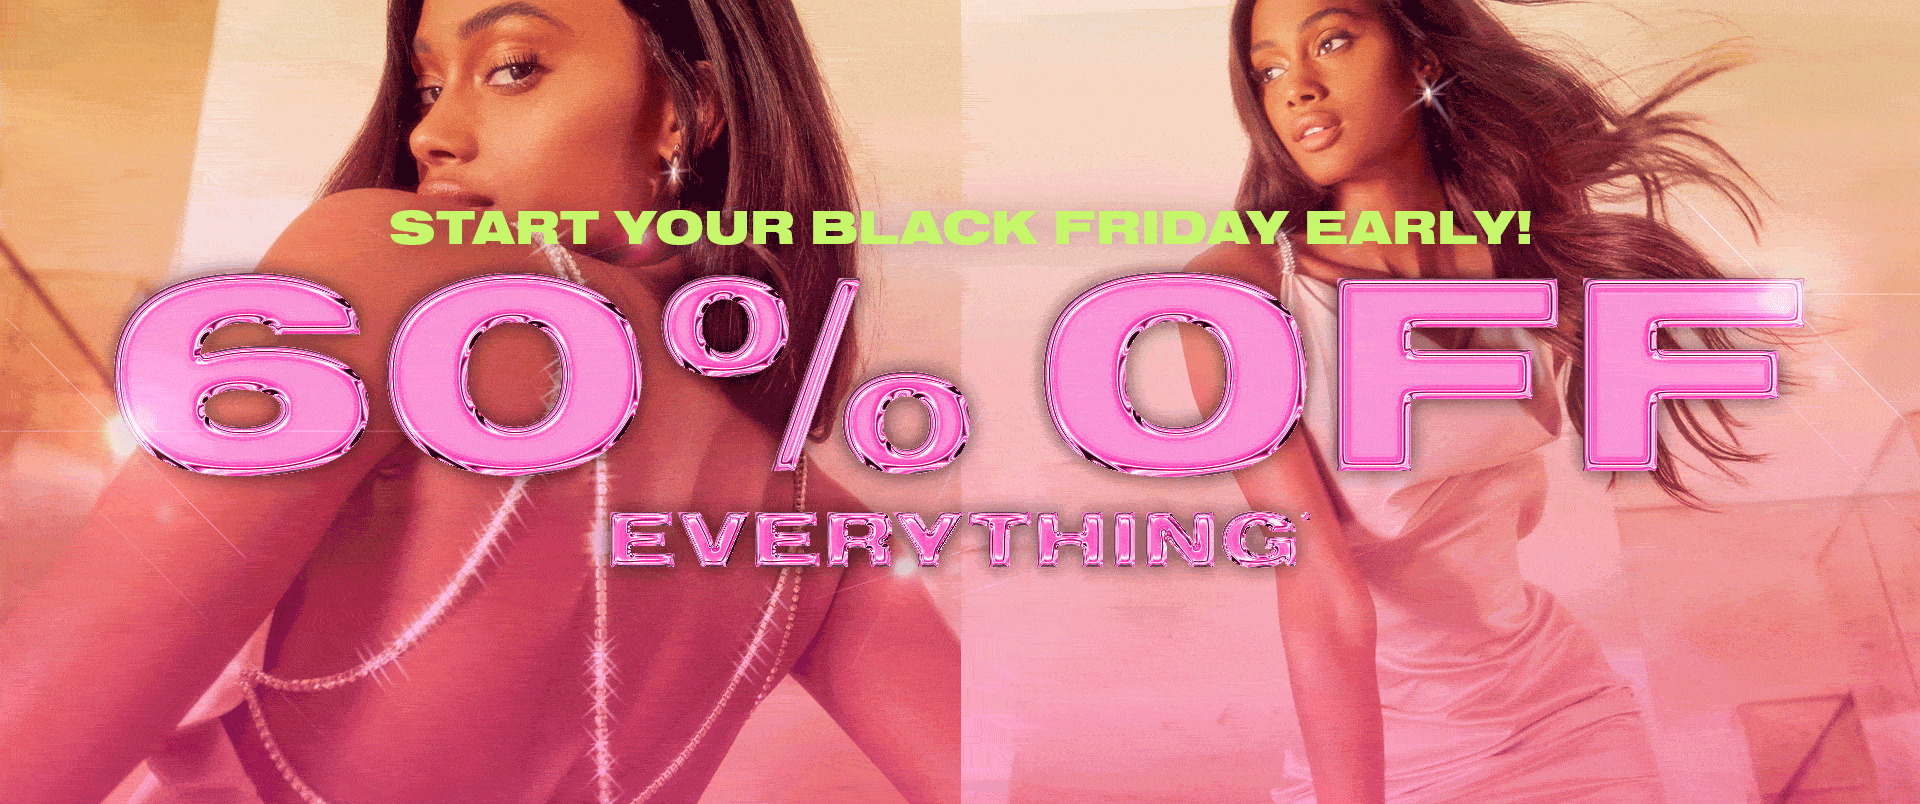 Boohoo Black Friday 60% OFF everything including dresses, tops, new in & more